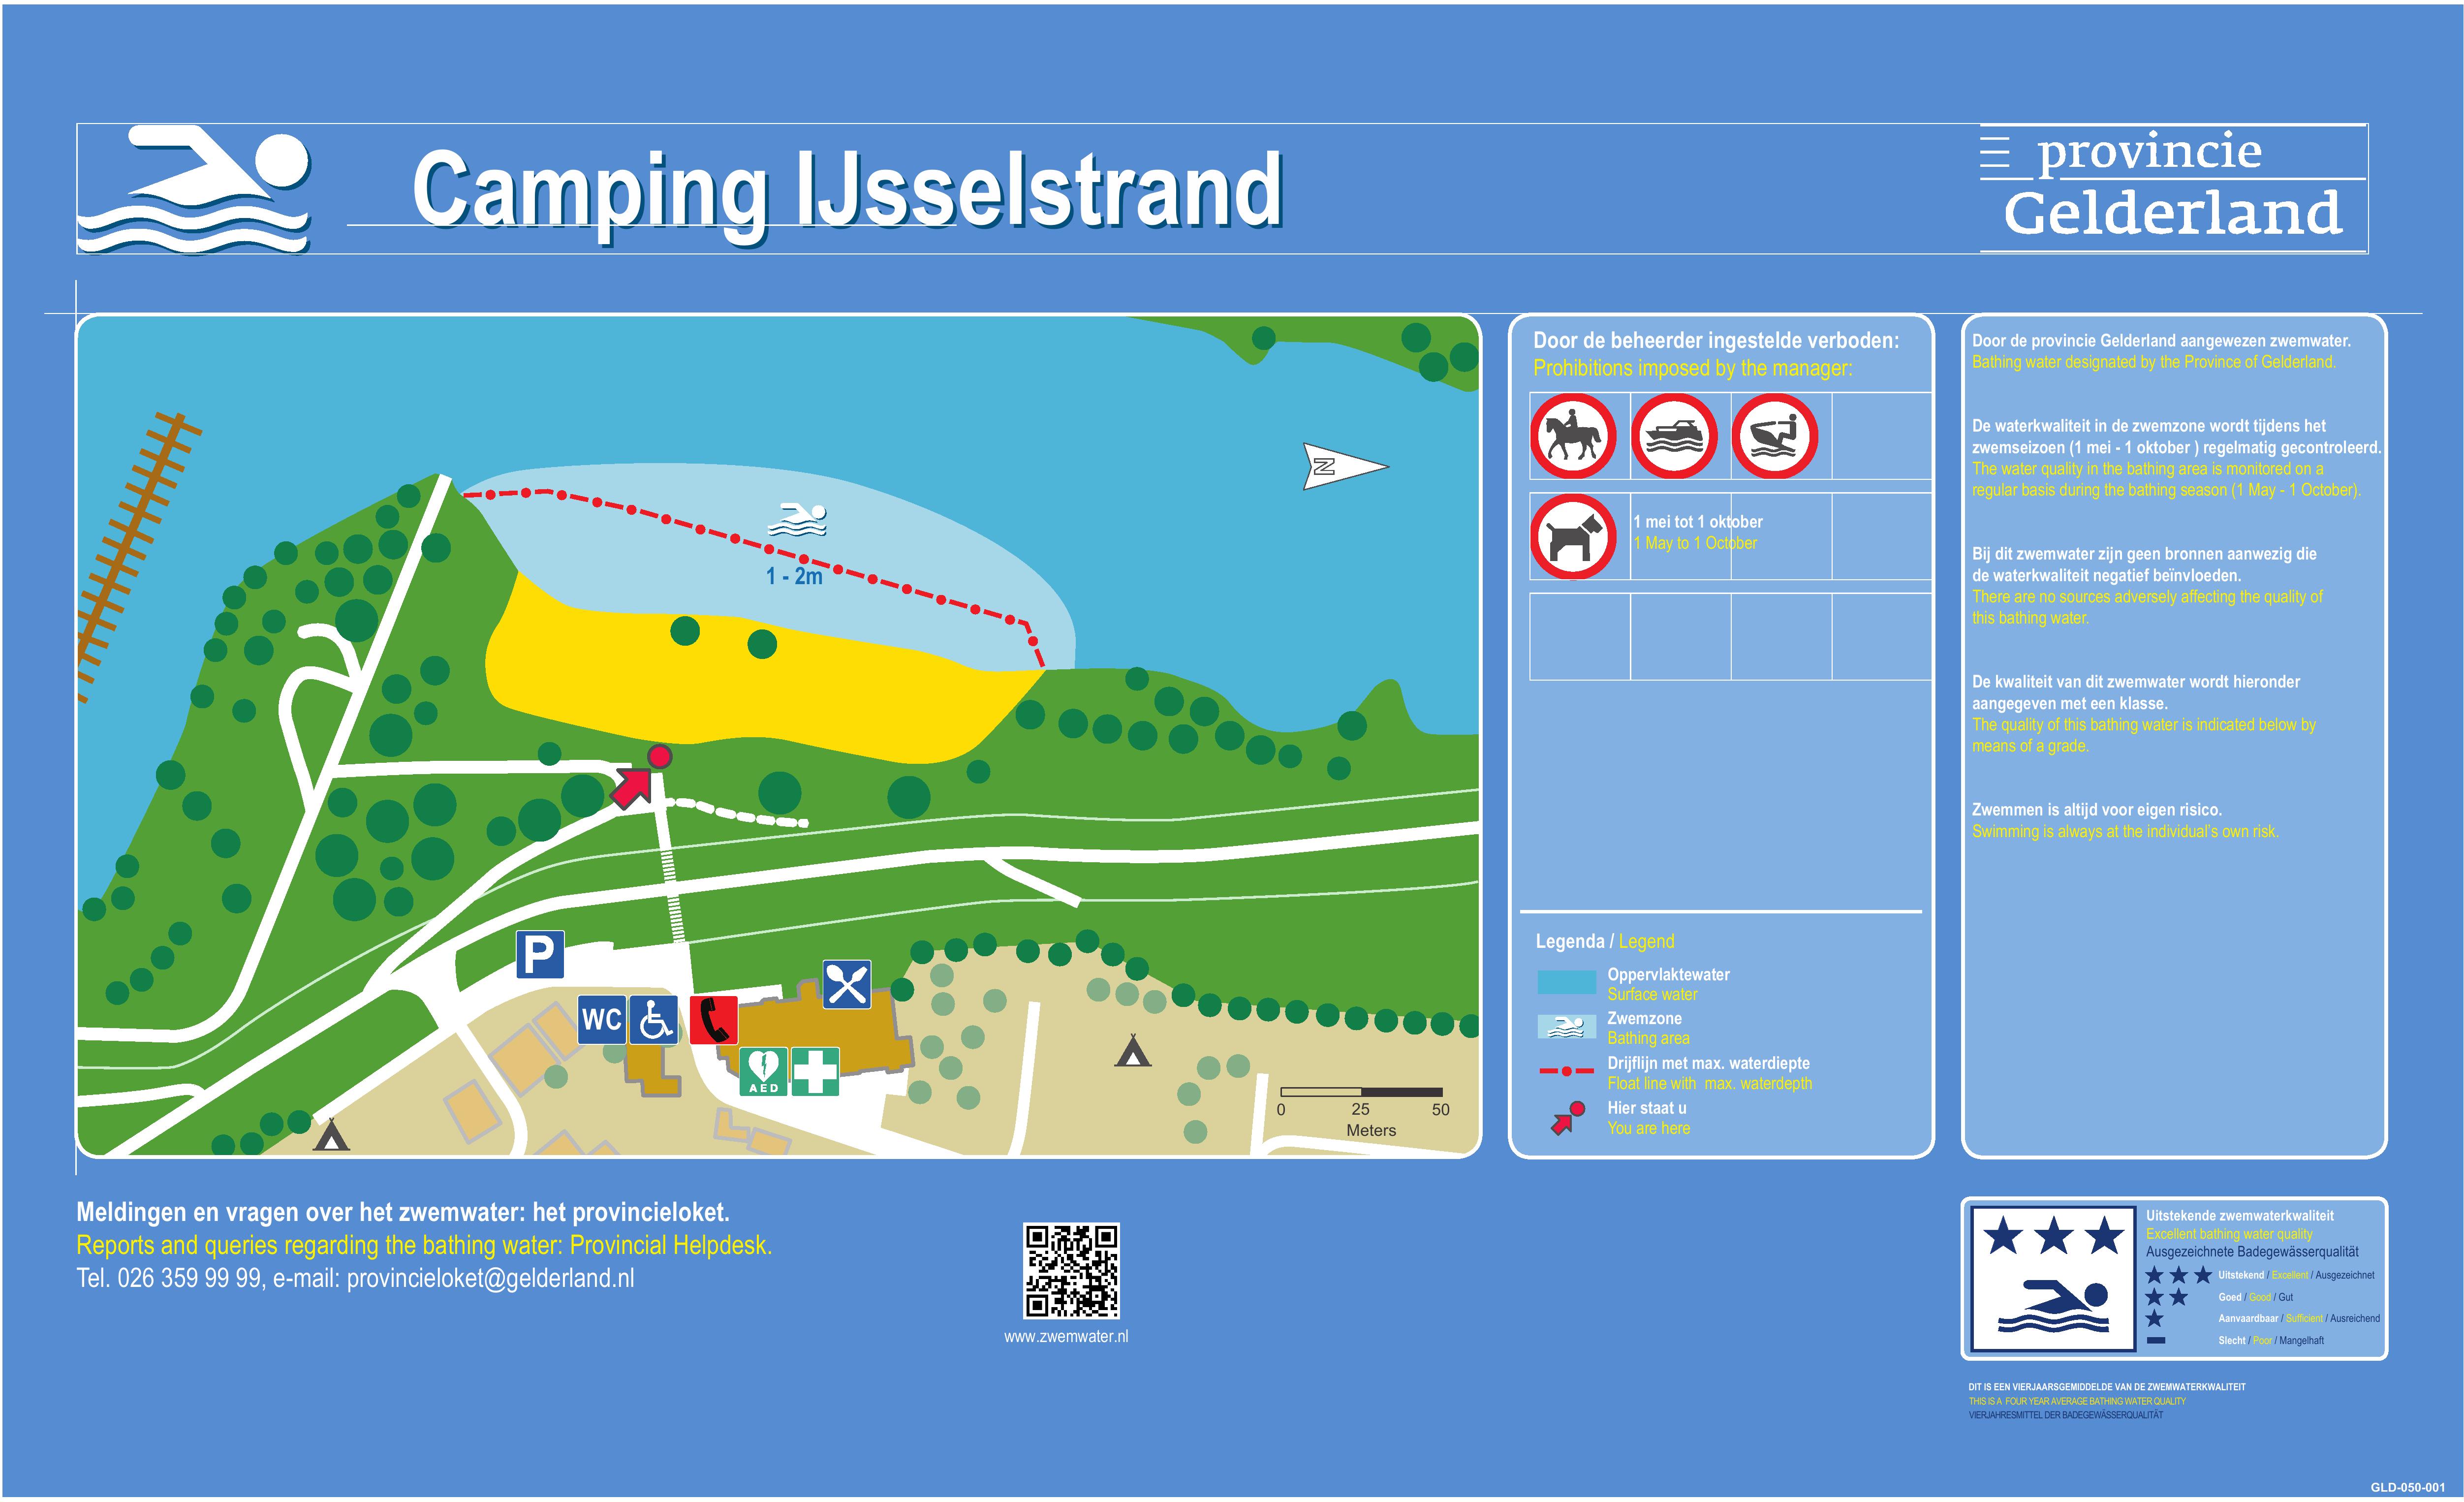 The information board at the swimming location Camping Ijsselstrand